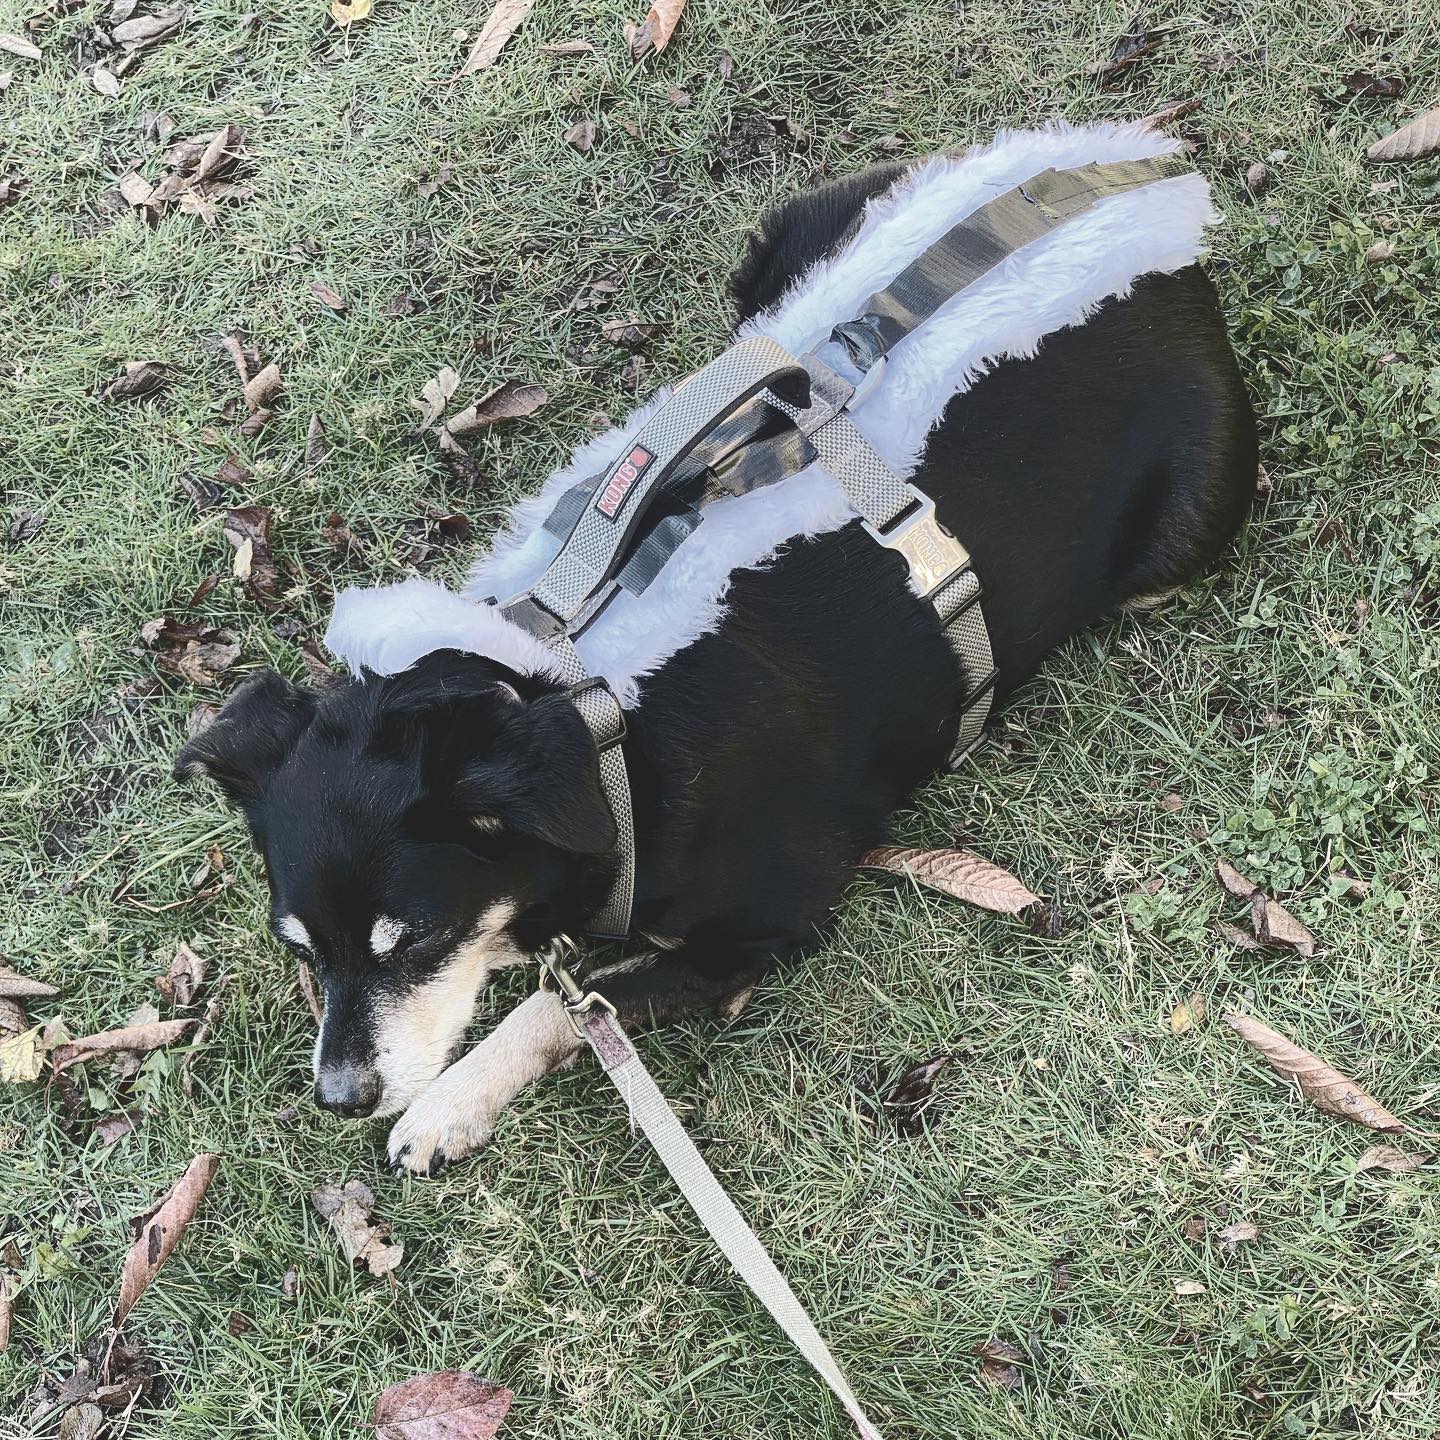 Buttons wearing her #skunk costume for #halloween 

#halloweencostume #halloweendog #victoriadogs #dogsofvictoriabc